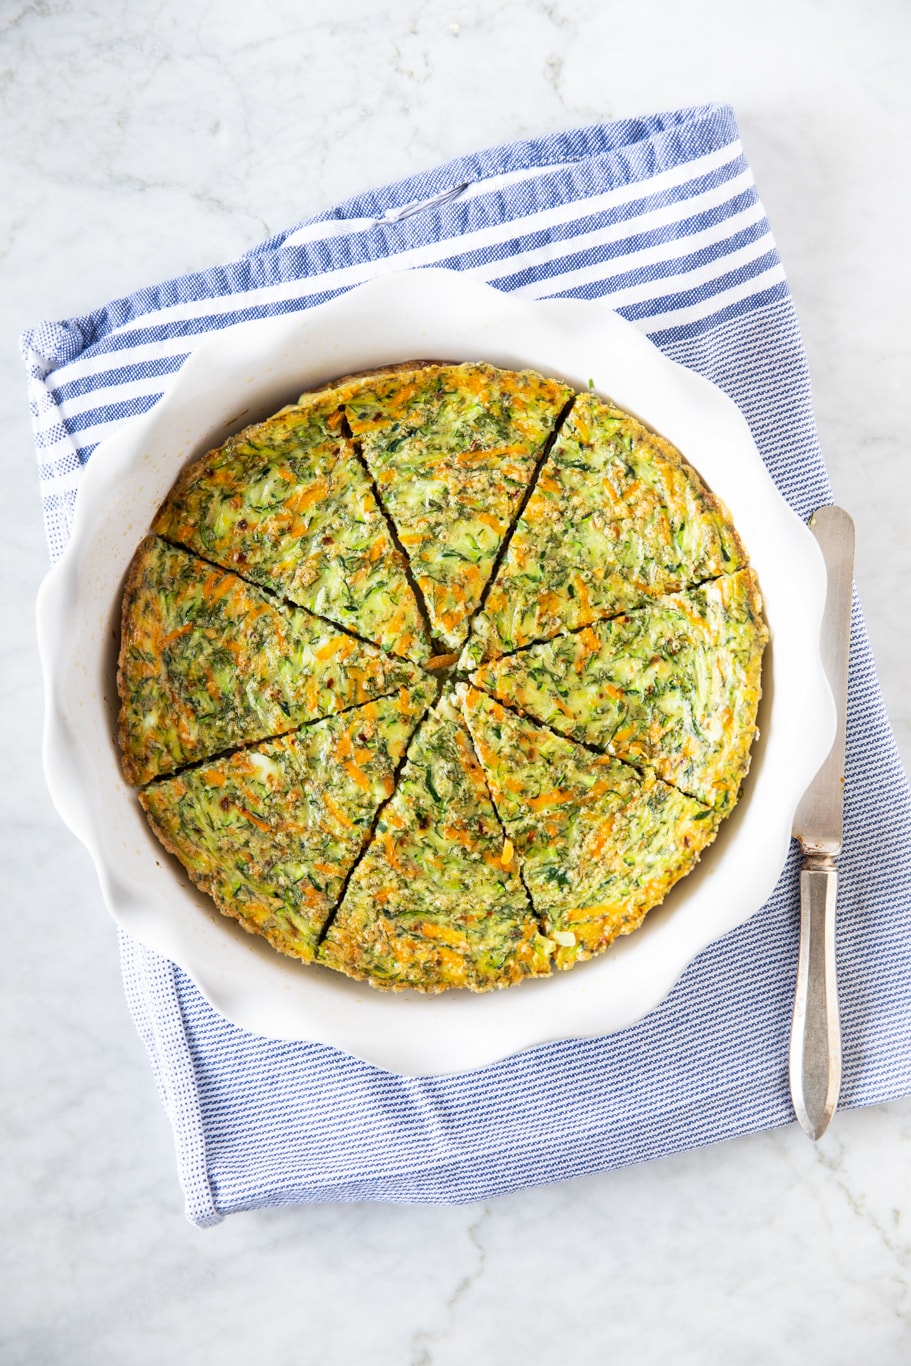 Crustless carrot zucchini quiche in a baking dish, on top of a blue/white kitchen towel